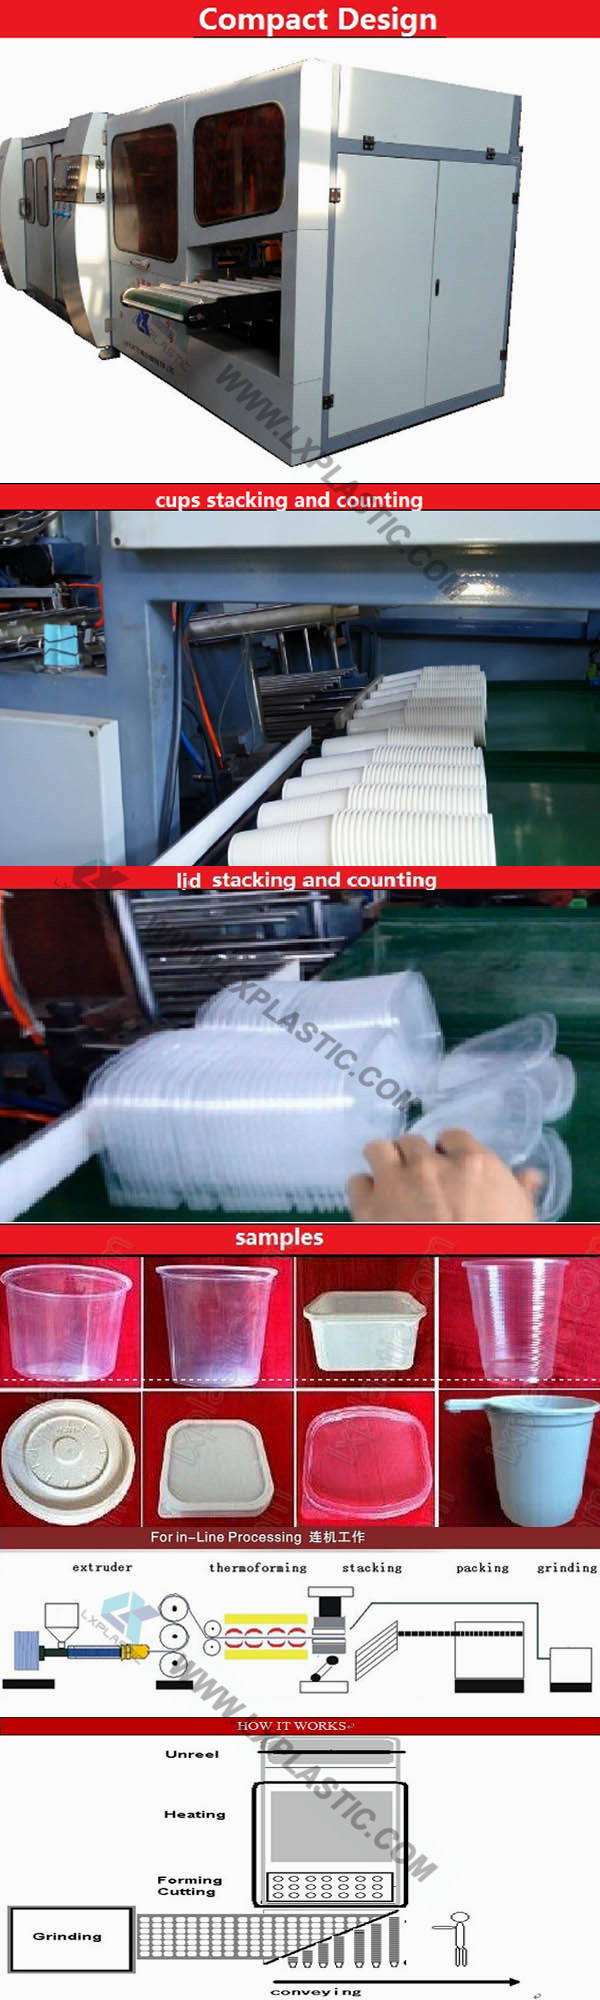 Robot Stacker for Cup, Lid, Tray, Container and Clamshell